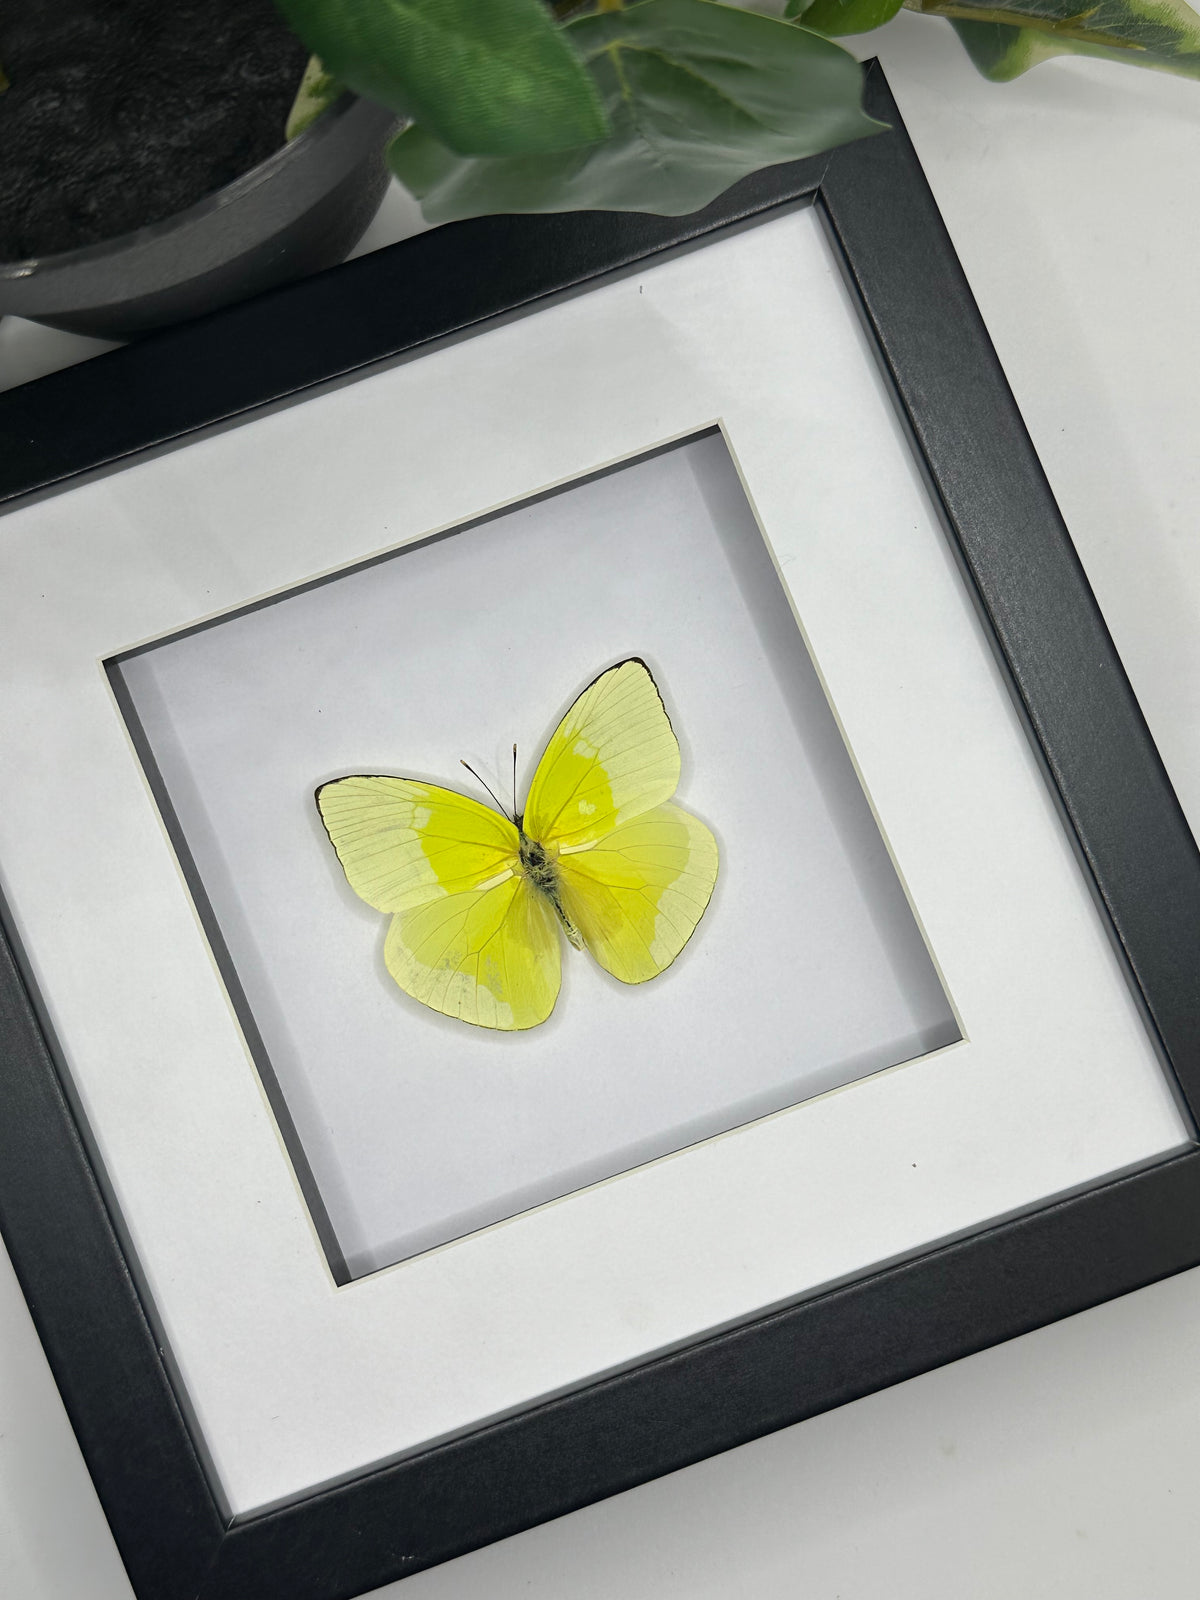 Phoebis Statira Butterfly in a frame